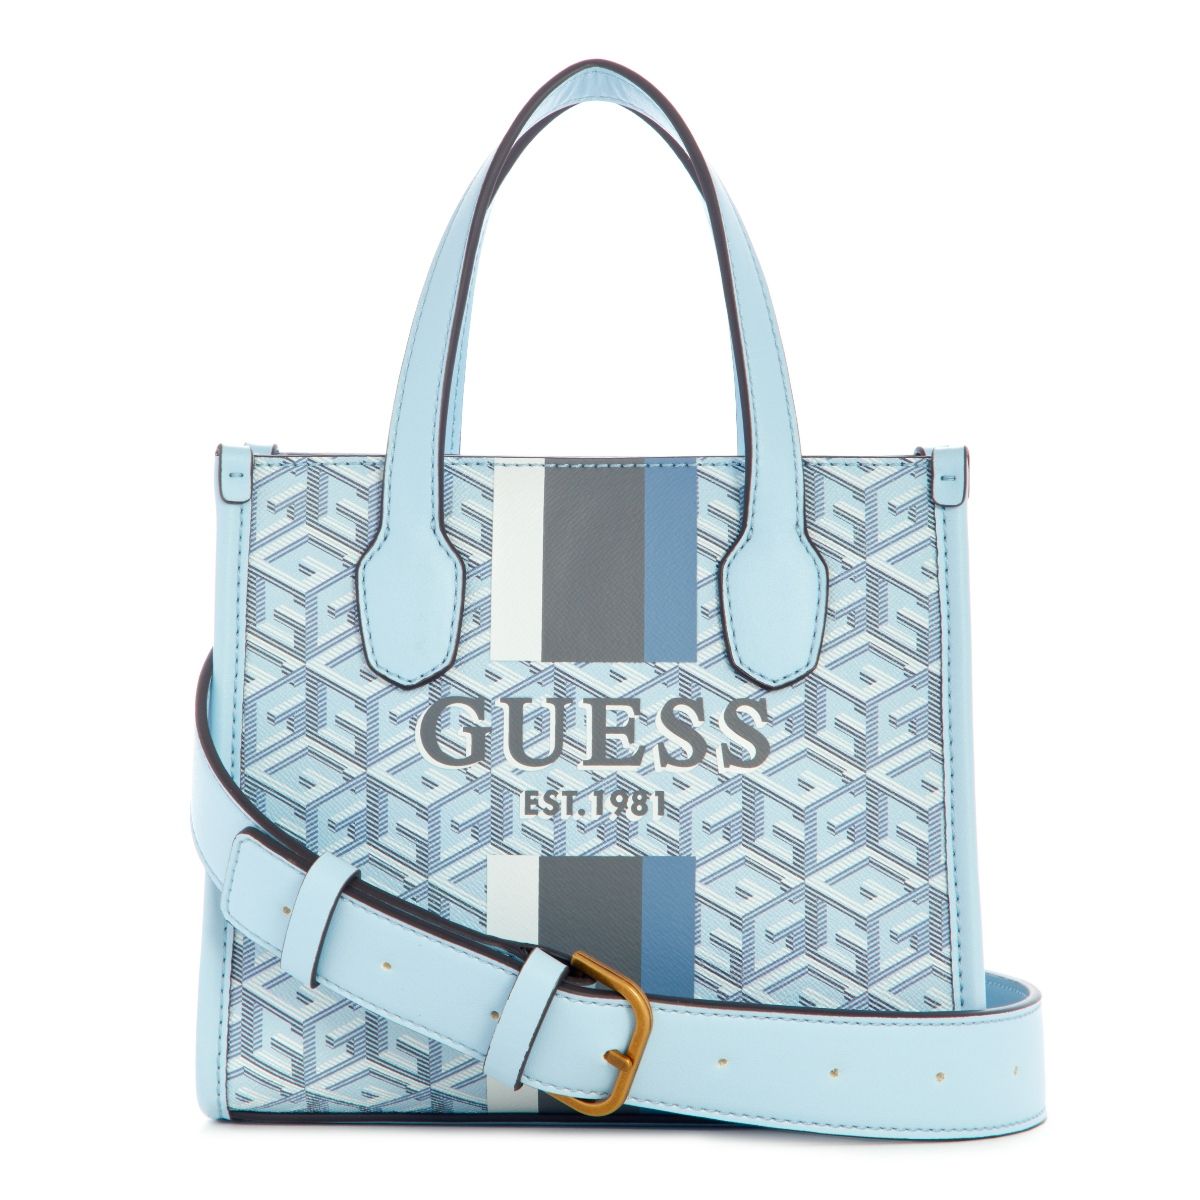 Complete your look with a unique GUESS bag ✨ | Instagram